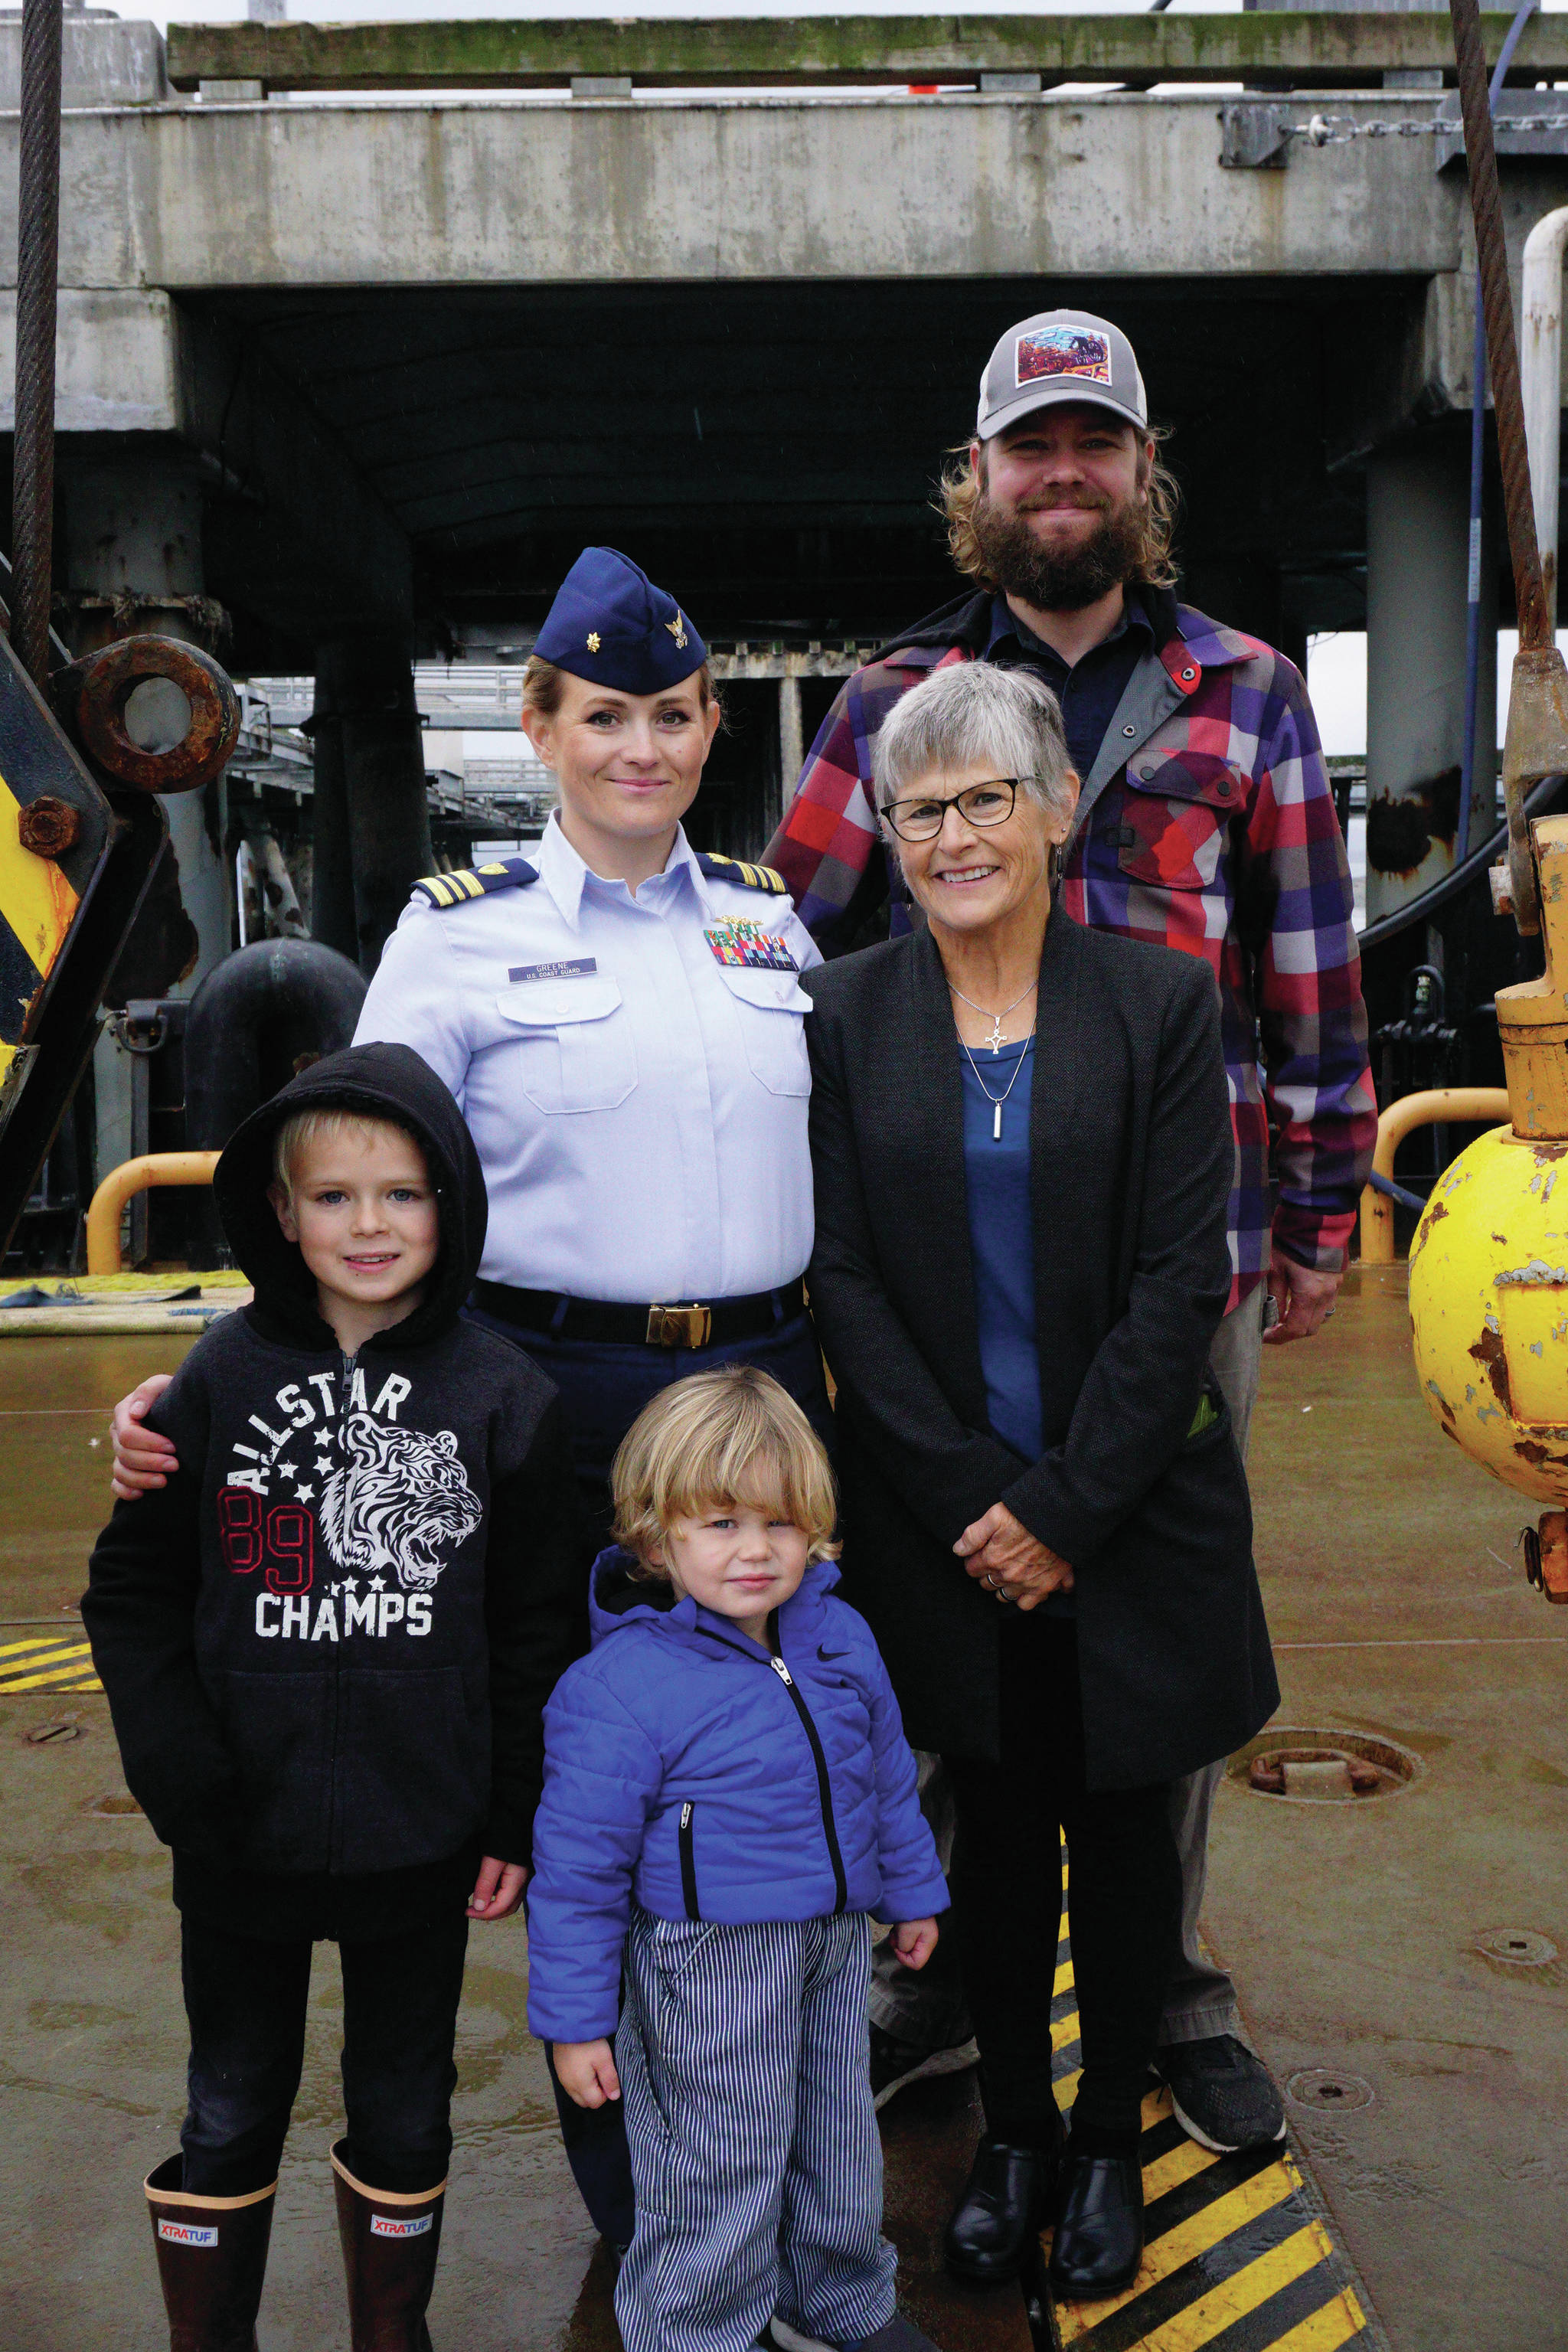 The new U.S. Coast Guard Cutter Hickory Captain, Lt. Cmdr. Jeannette M. Greene, center poses with her family on the deck of the Hickory after Greene’s assumption of command ceremony on Friday, Oct. 4, 2019, at the Pioneer Dock, in Homer, Alaska. From left to right are her sons, Grady and Sawyer, her husband, Eric, and her mother, Marian West. (Photo by Michael Armstrong/Homer News)